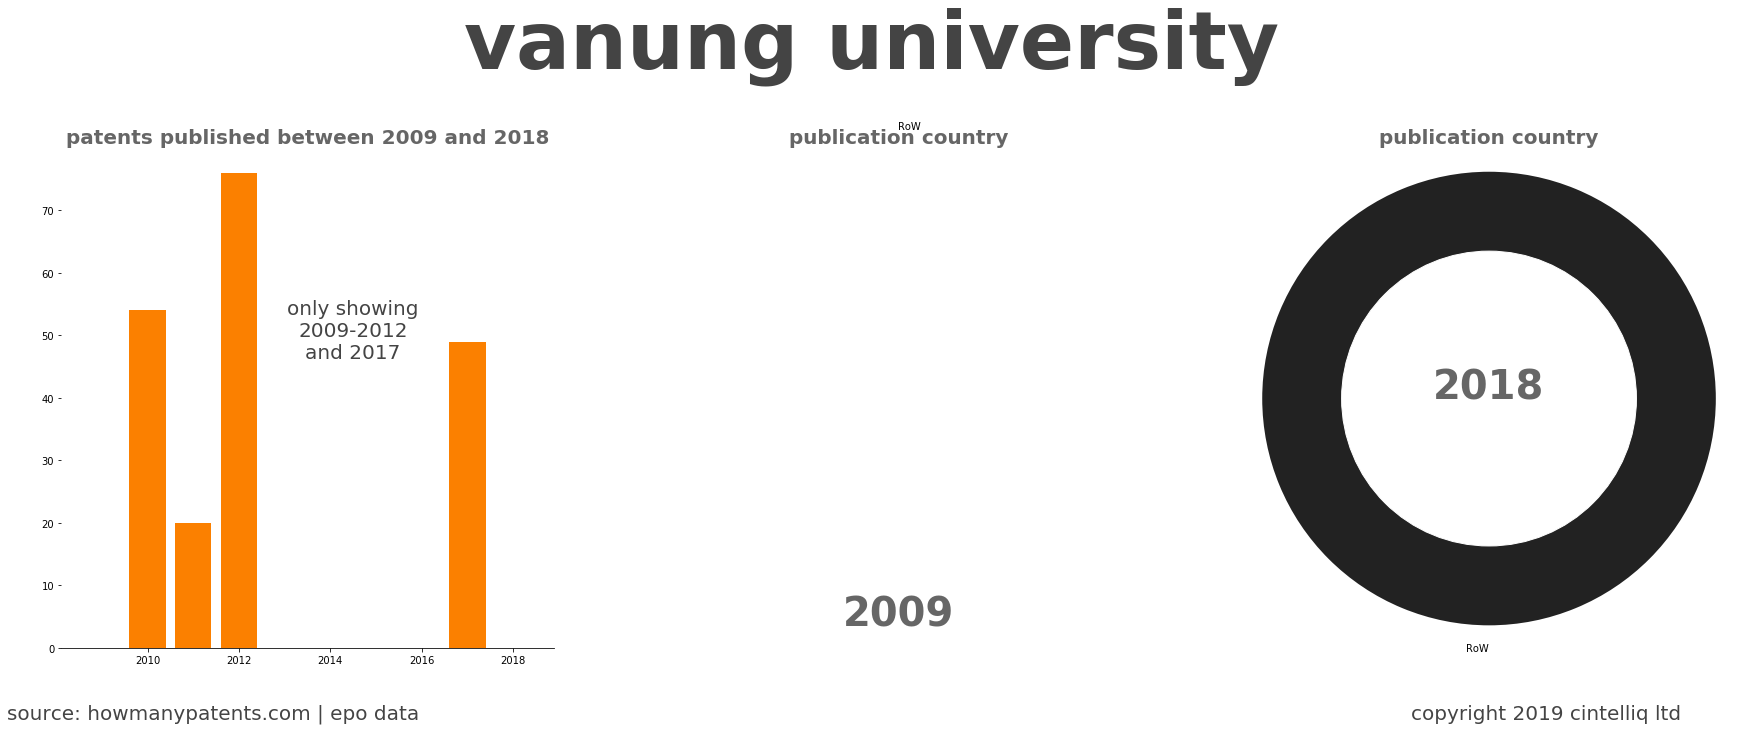 summary of patents for Vanung University